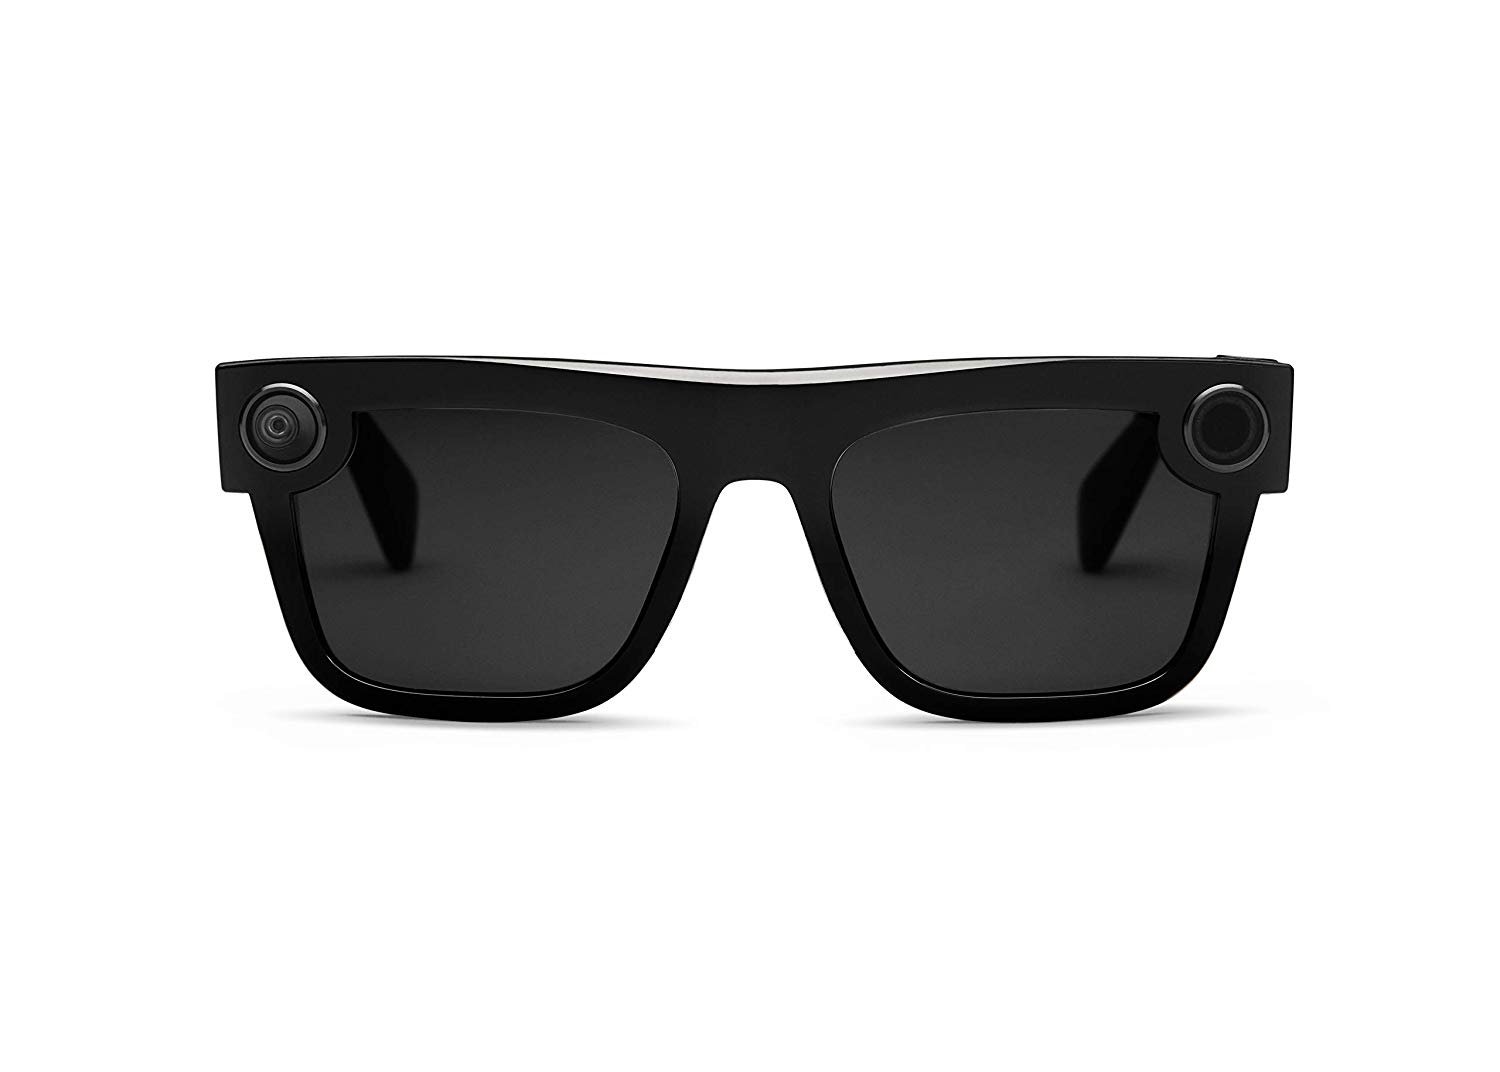 Spectacles - Water Resistant Camera Sunglasses - Made for Snapchat 1